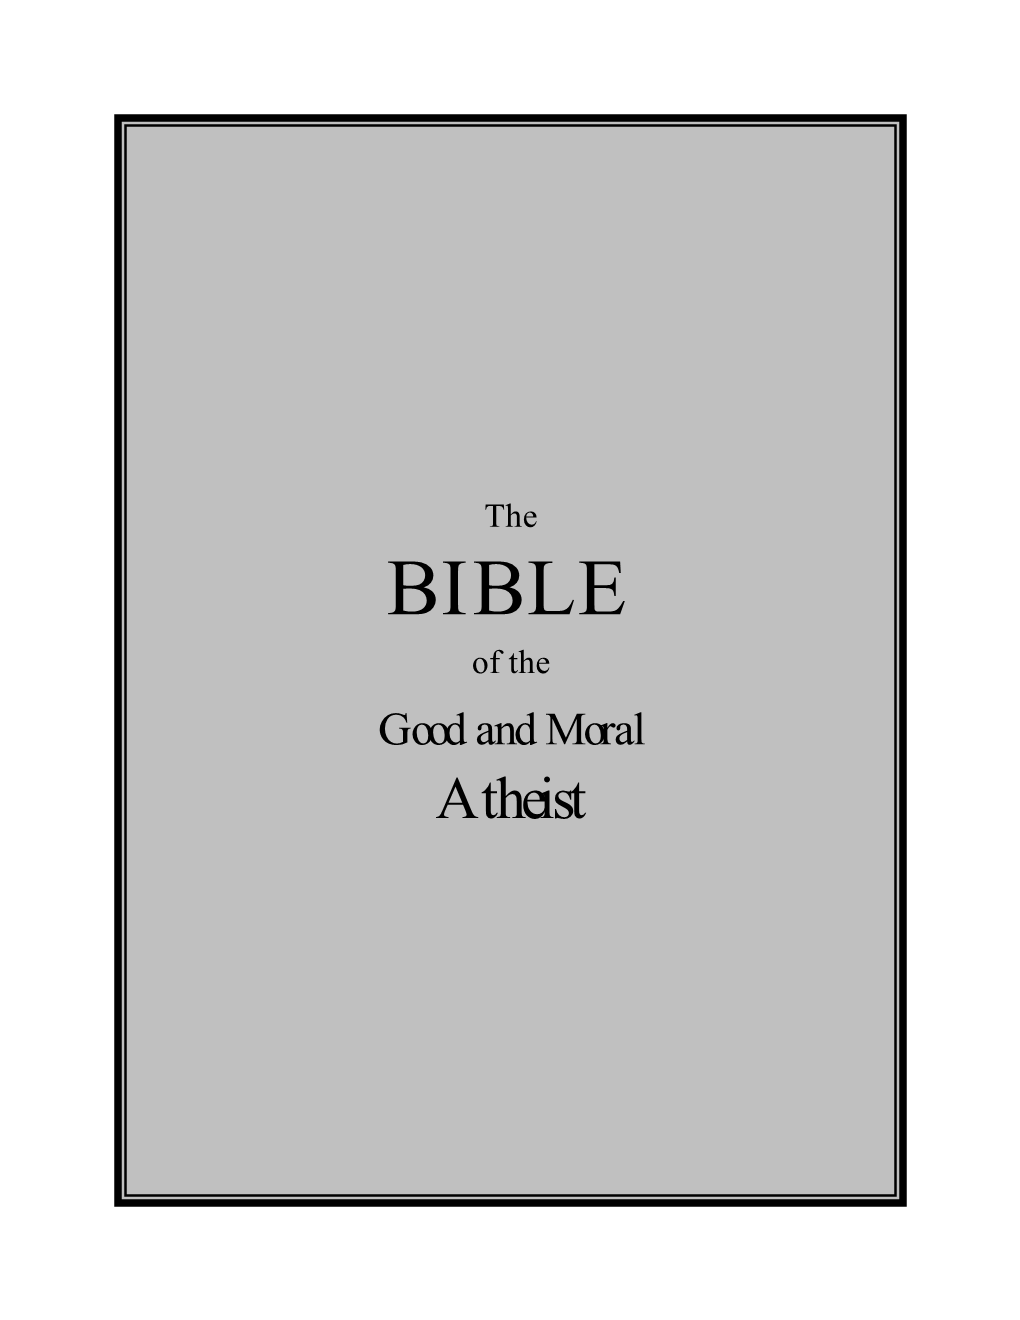 The Bible of the Good and Moral Atheist